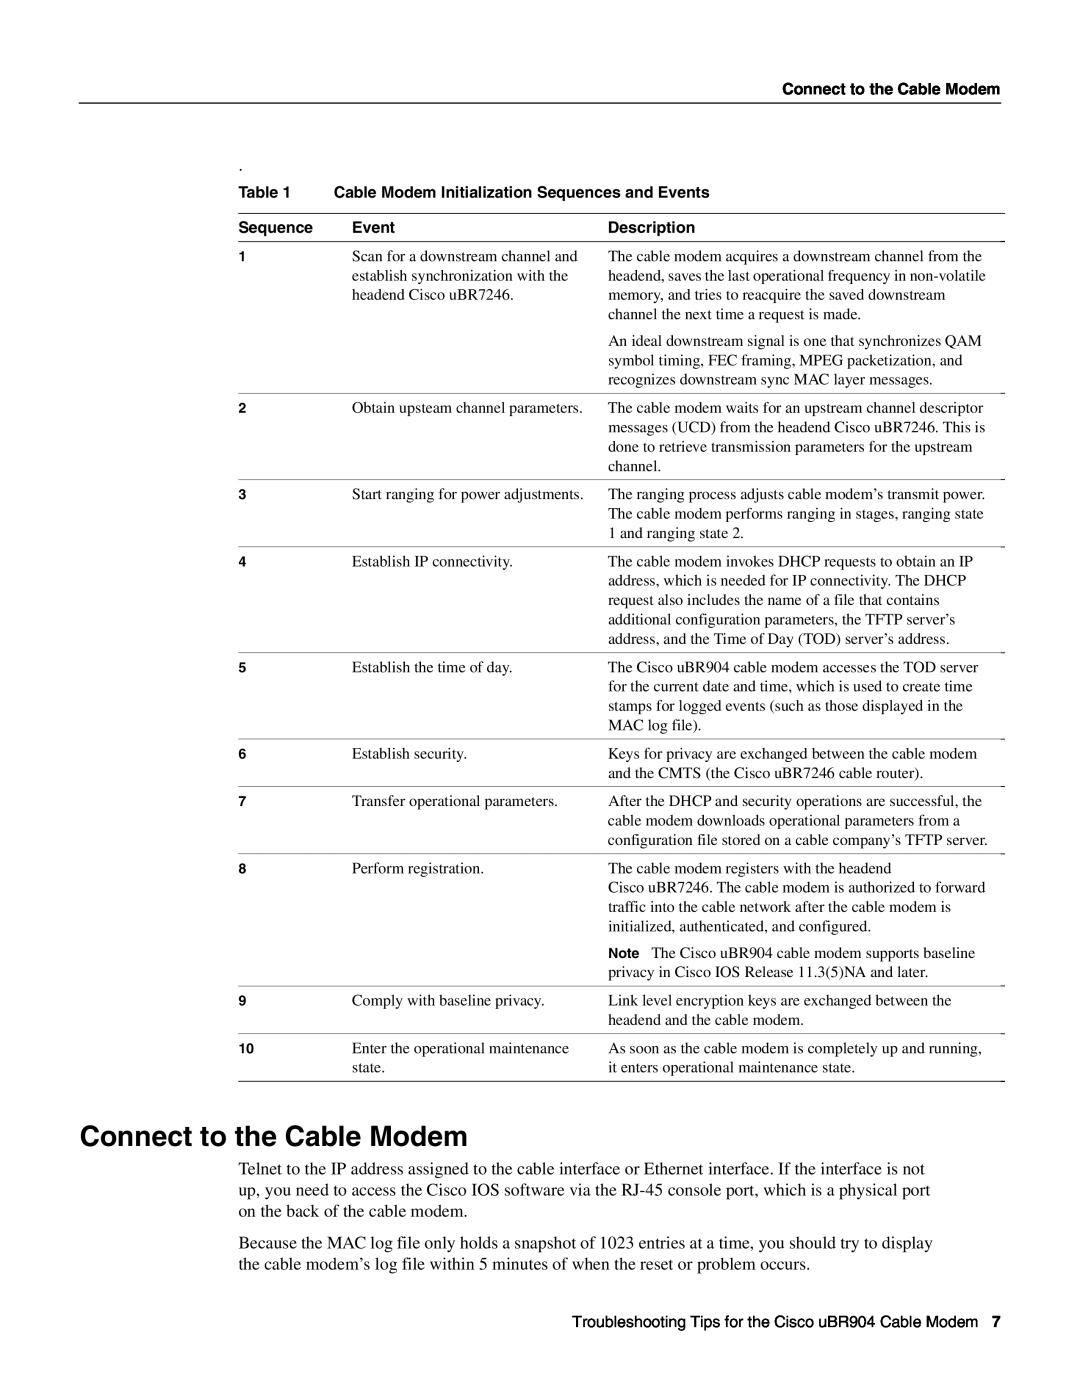 Cisco Systems UBR904 manual Connect to the Cable Modem, Cable Modem Initialization Sequences and Events, Description 